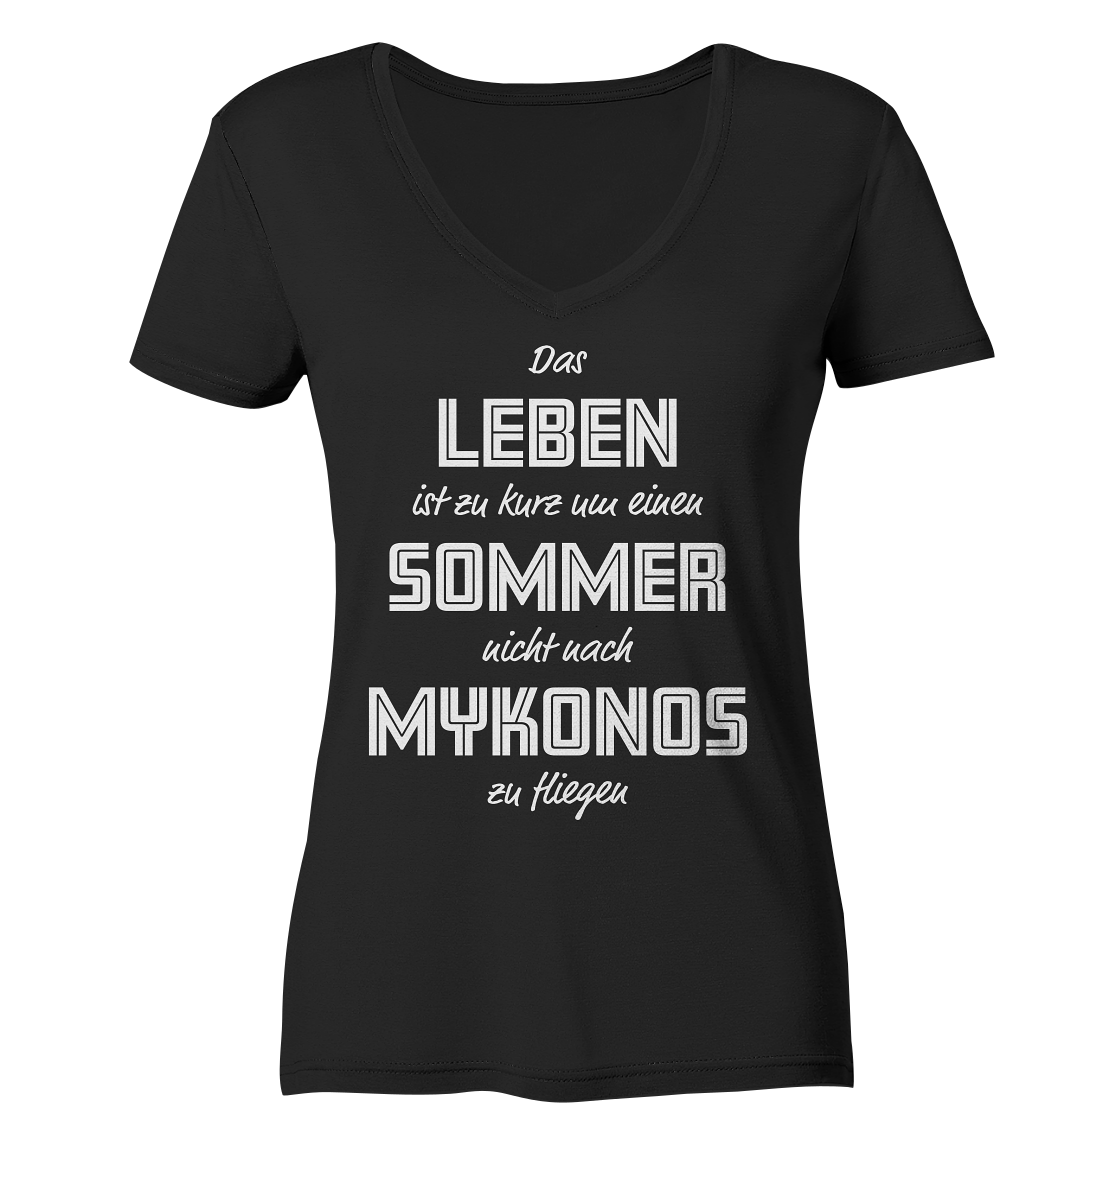 Life is too short not to fly to Mykonos for a summer - Ladies Organic V-Neck Shirt